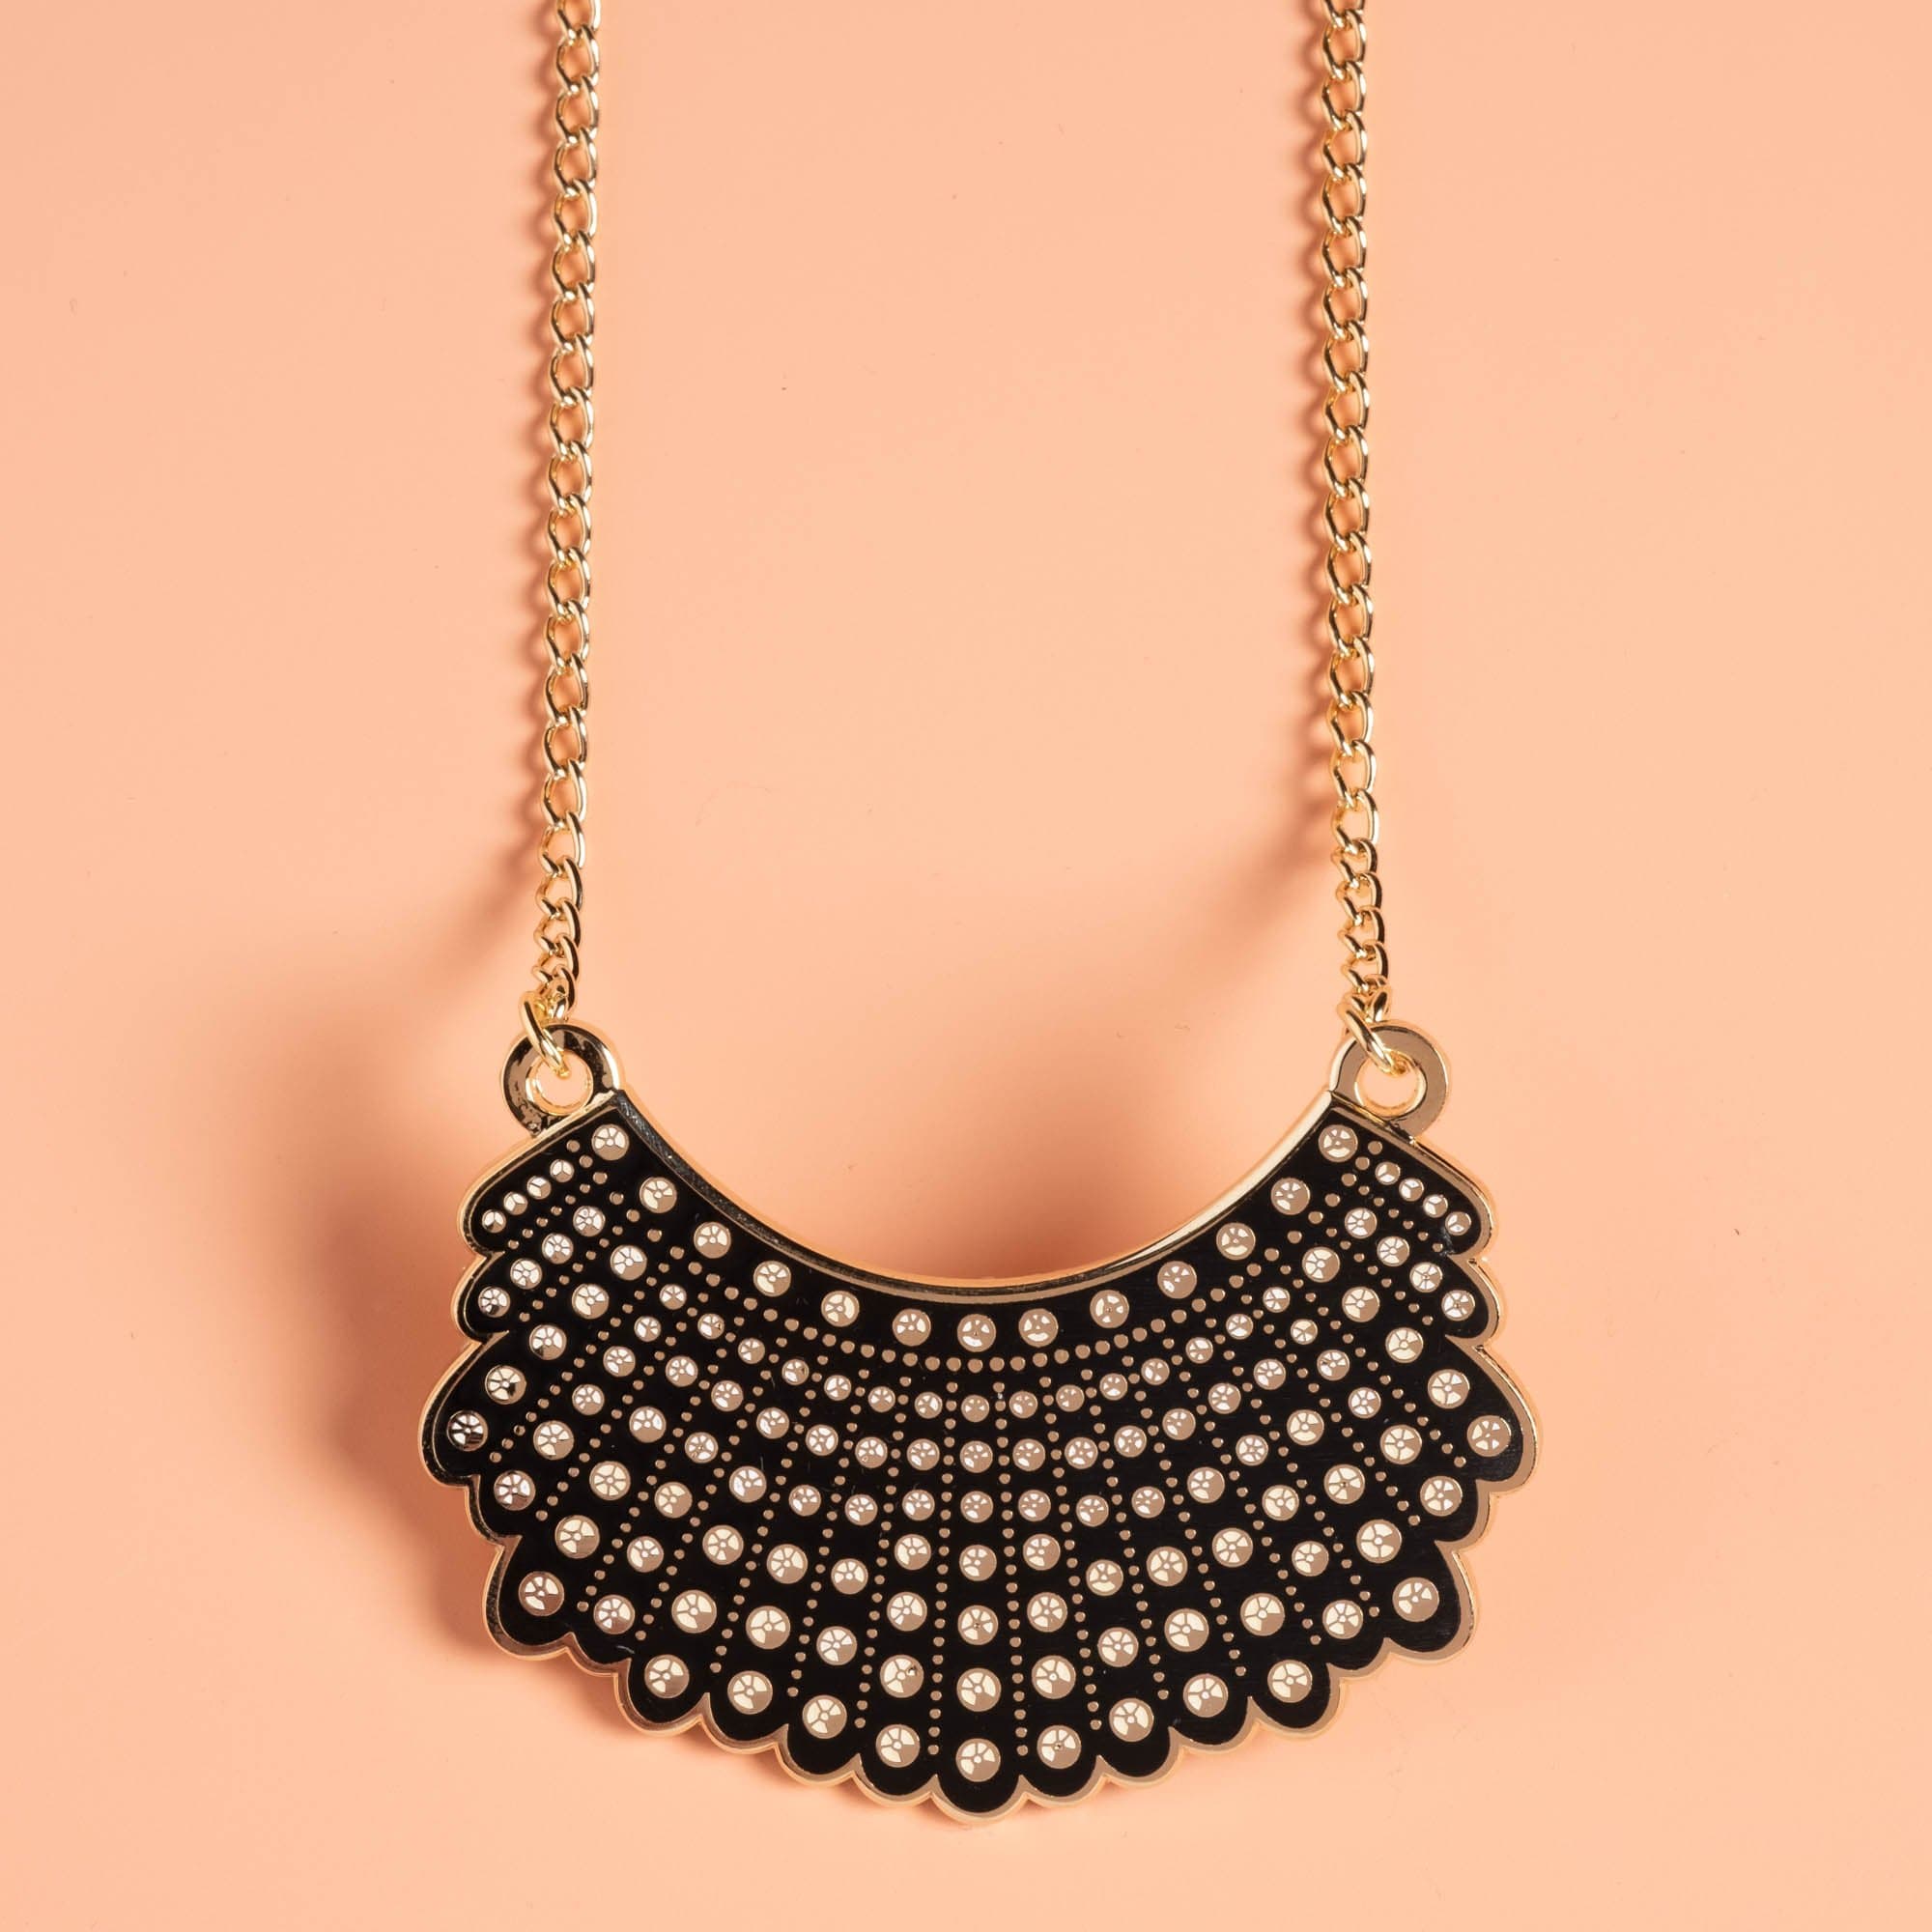 Dissent Collar Necklace XL Edition